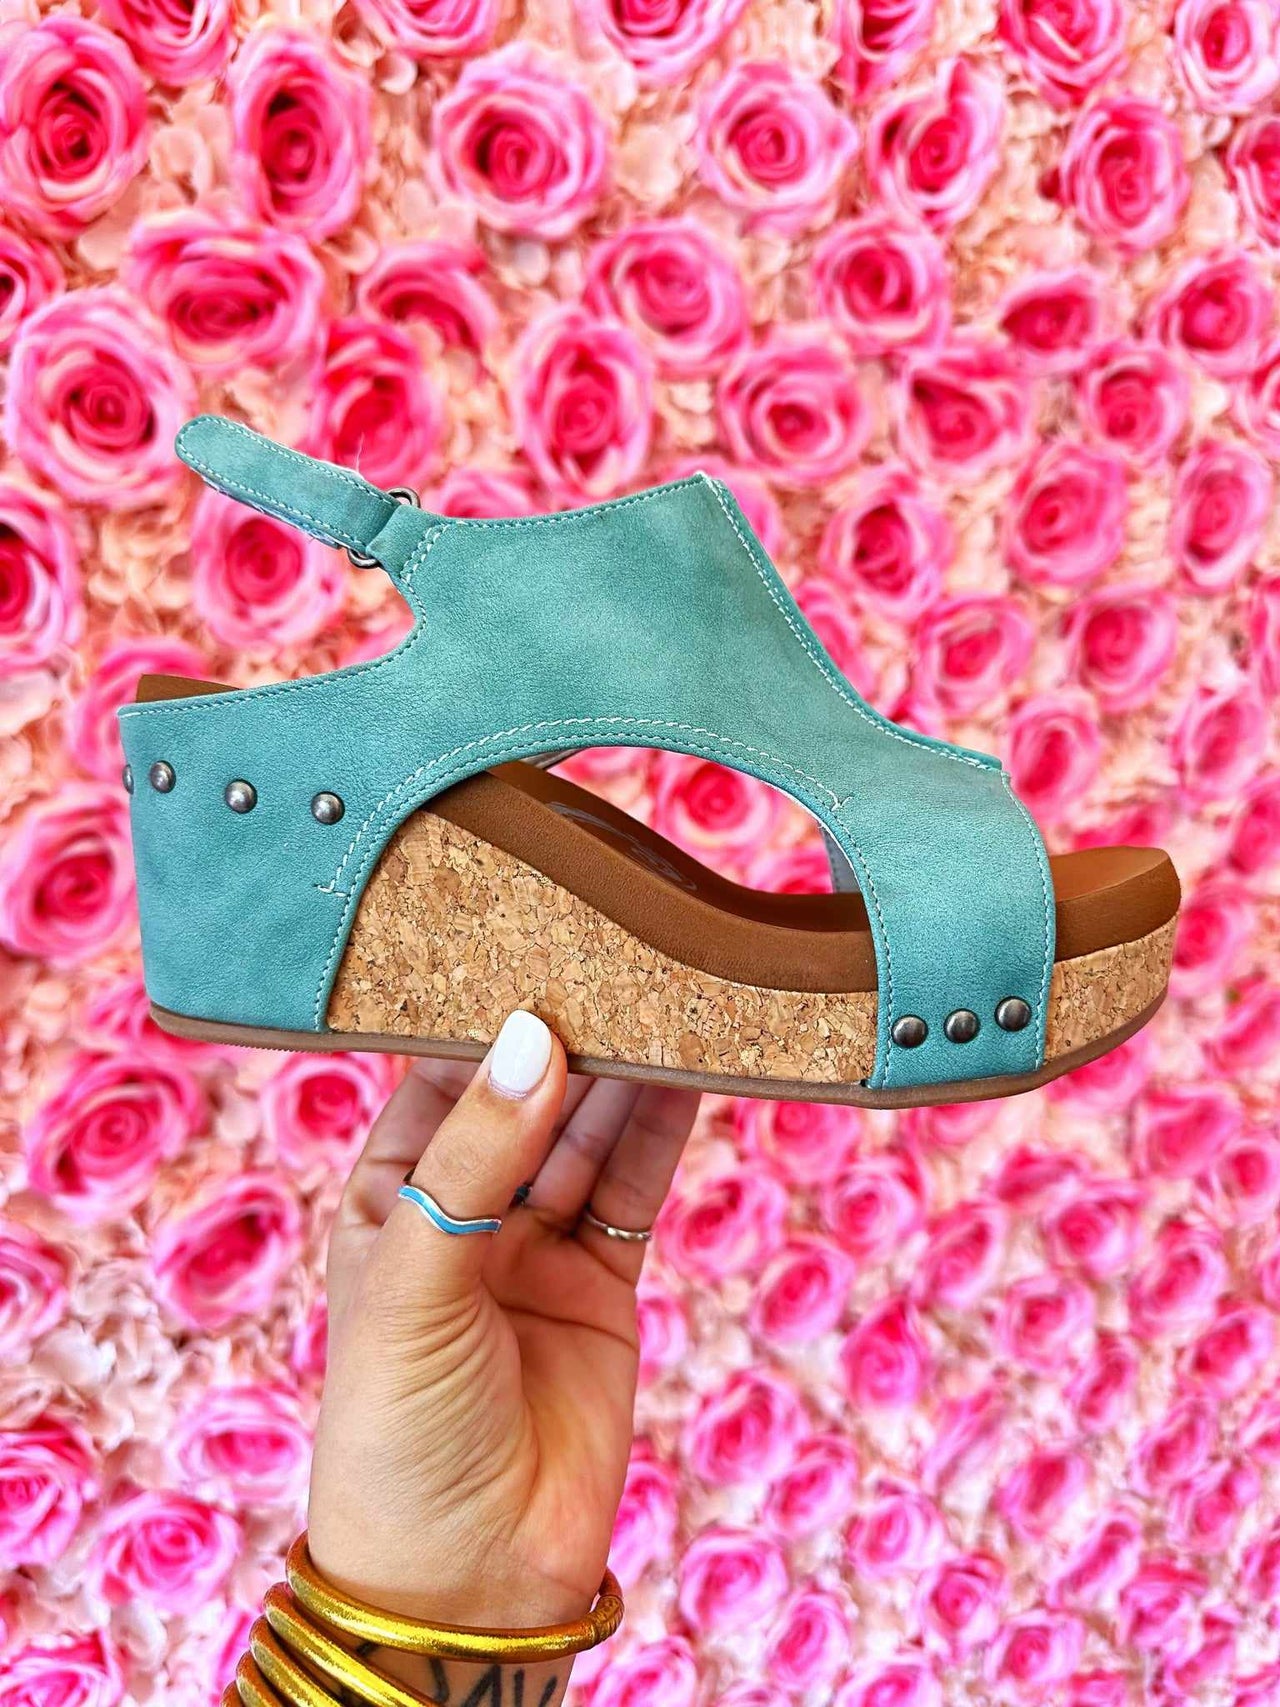 Turquoise suede wedge sandal.